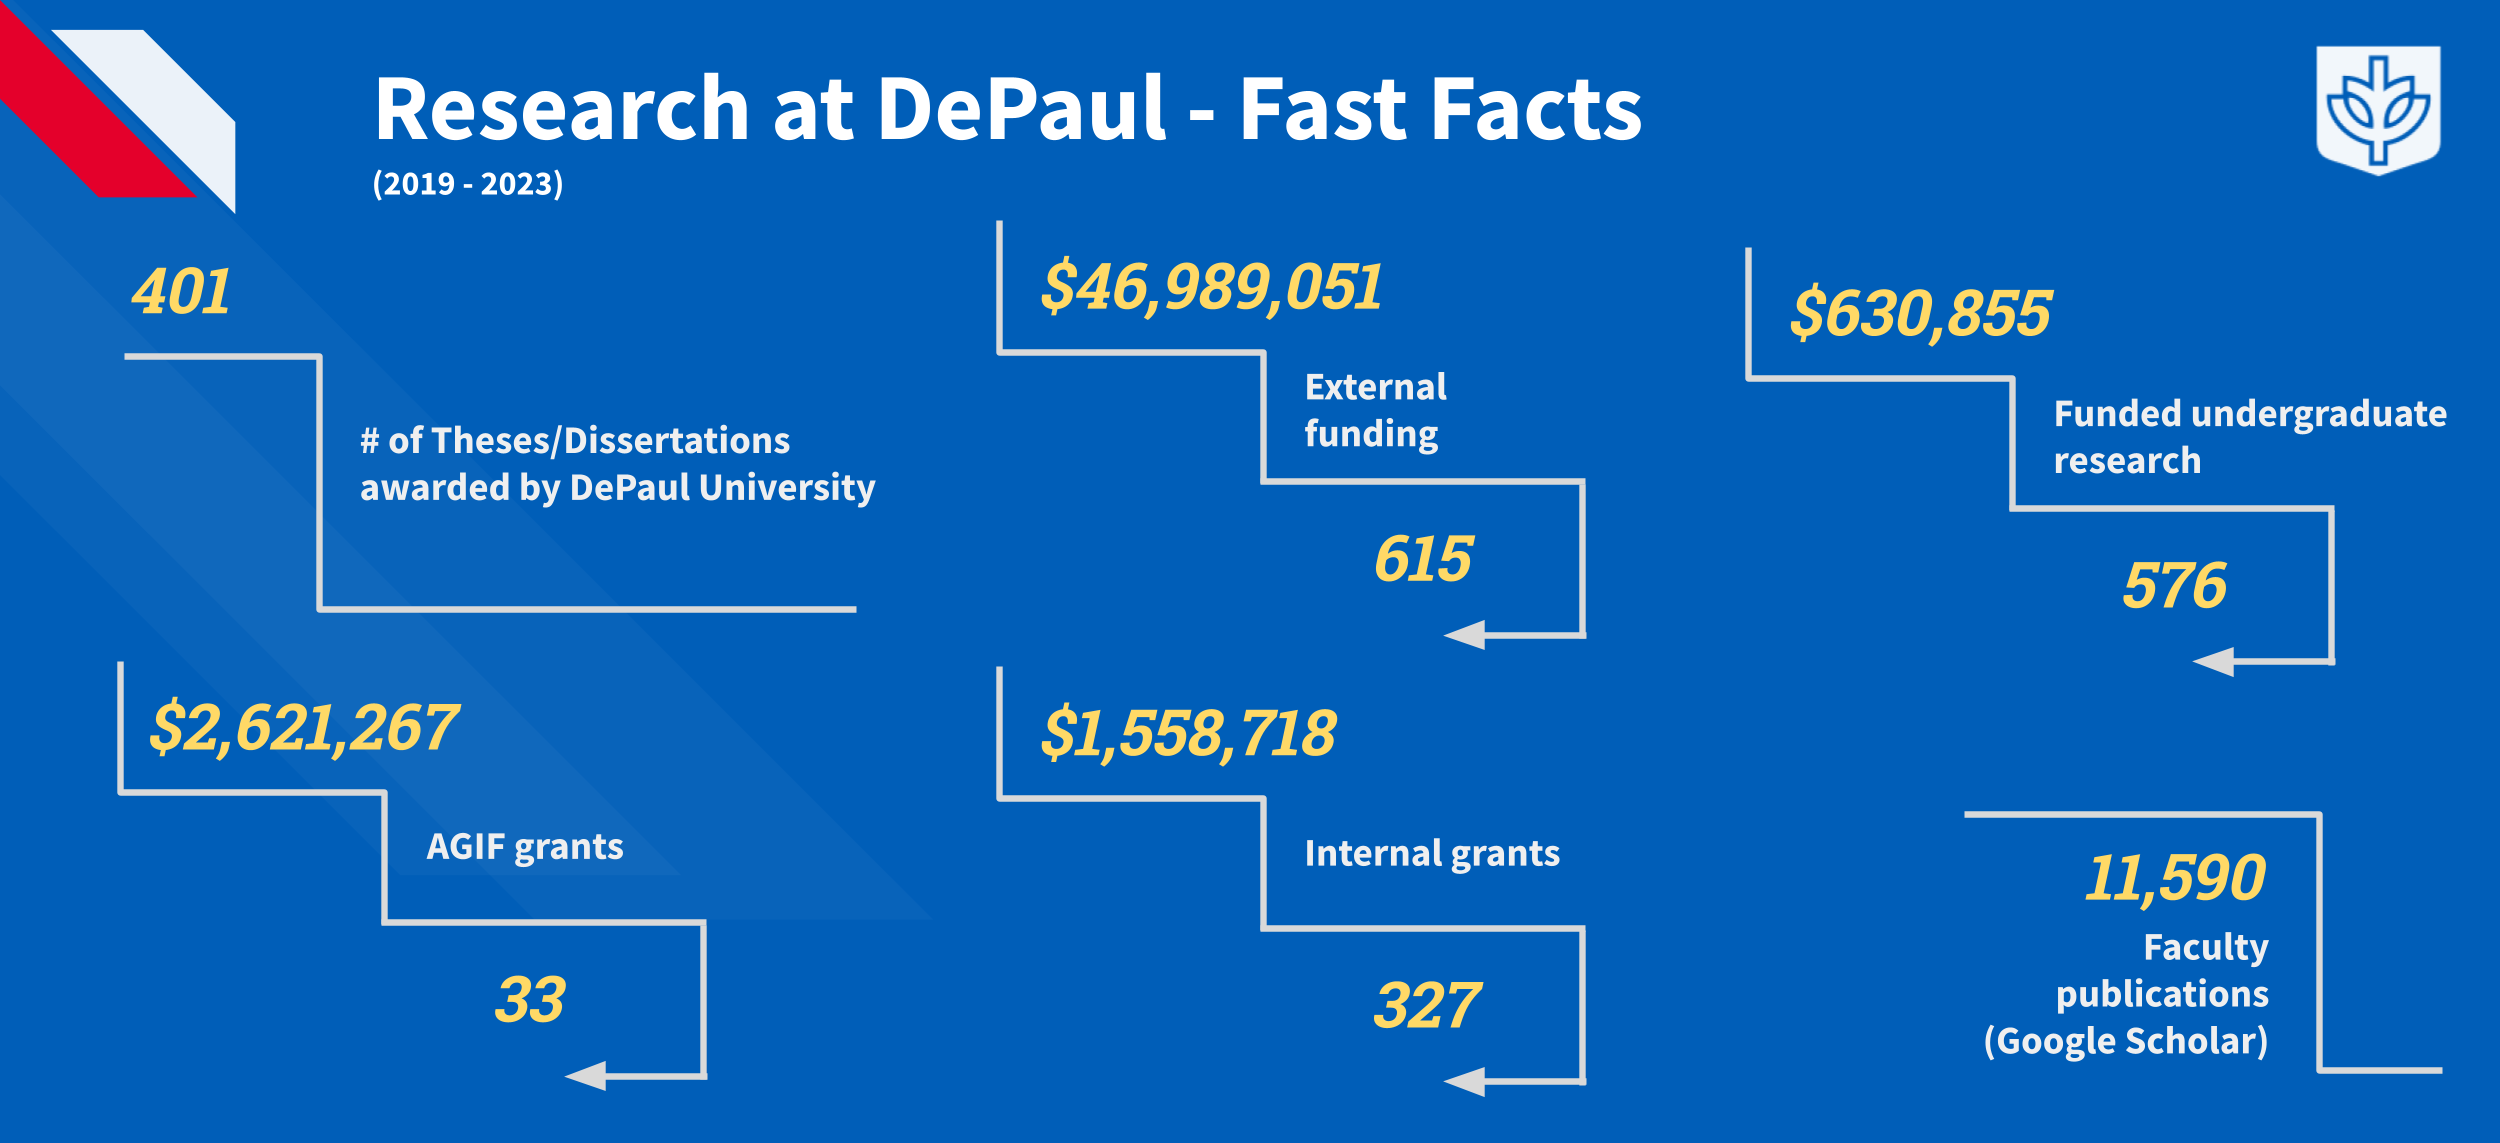 Research at DePaul Fast Facts Infographic